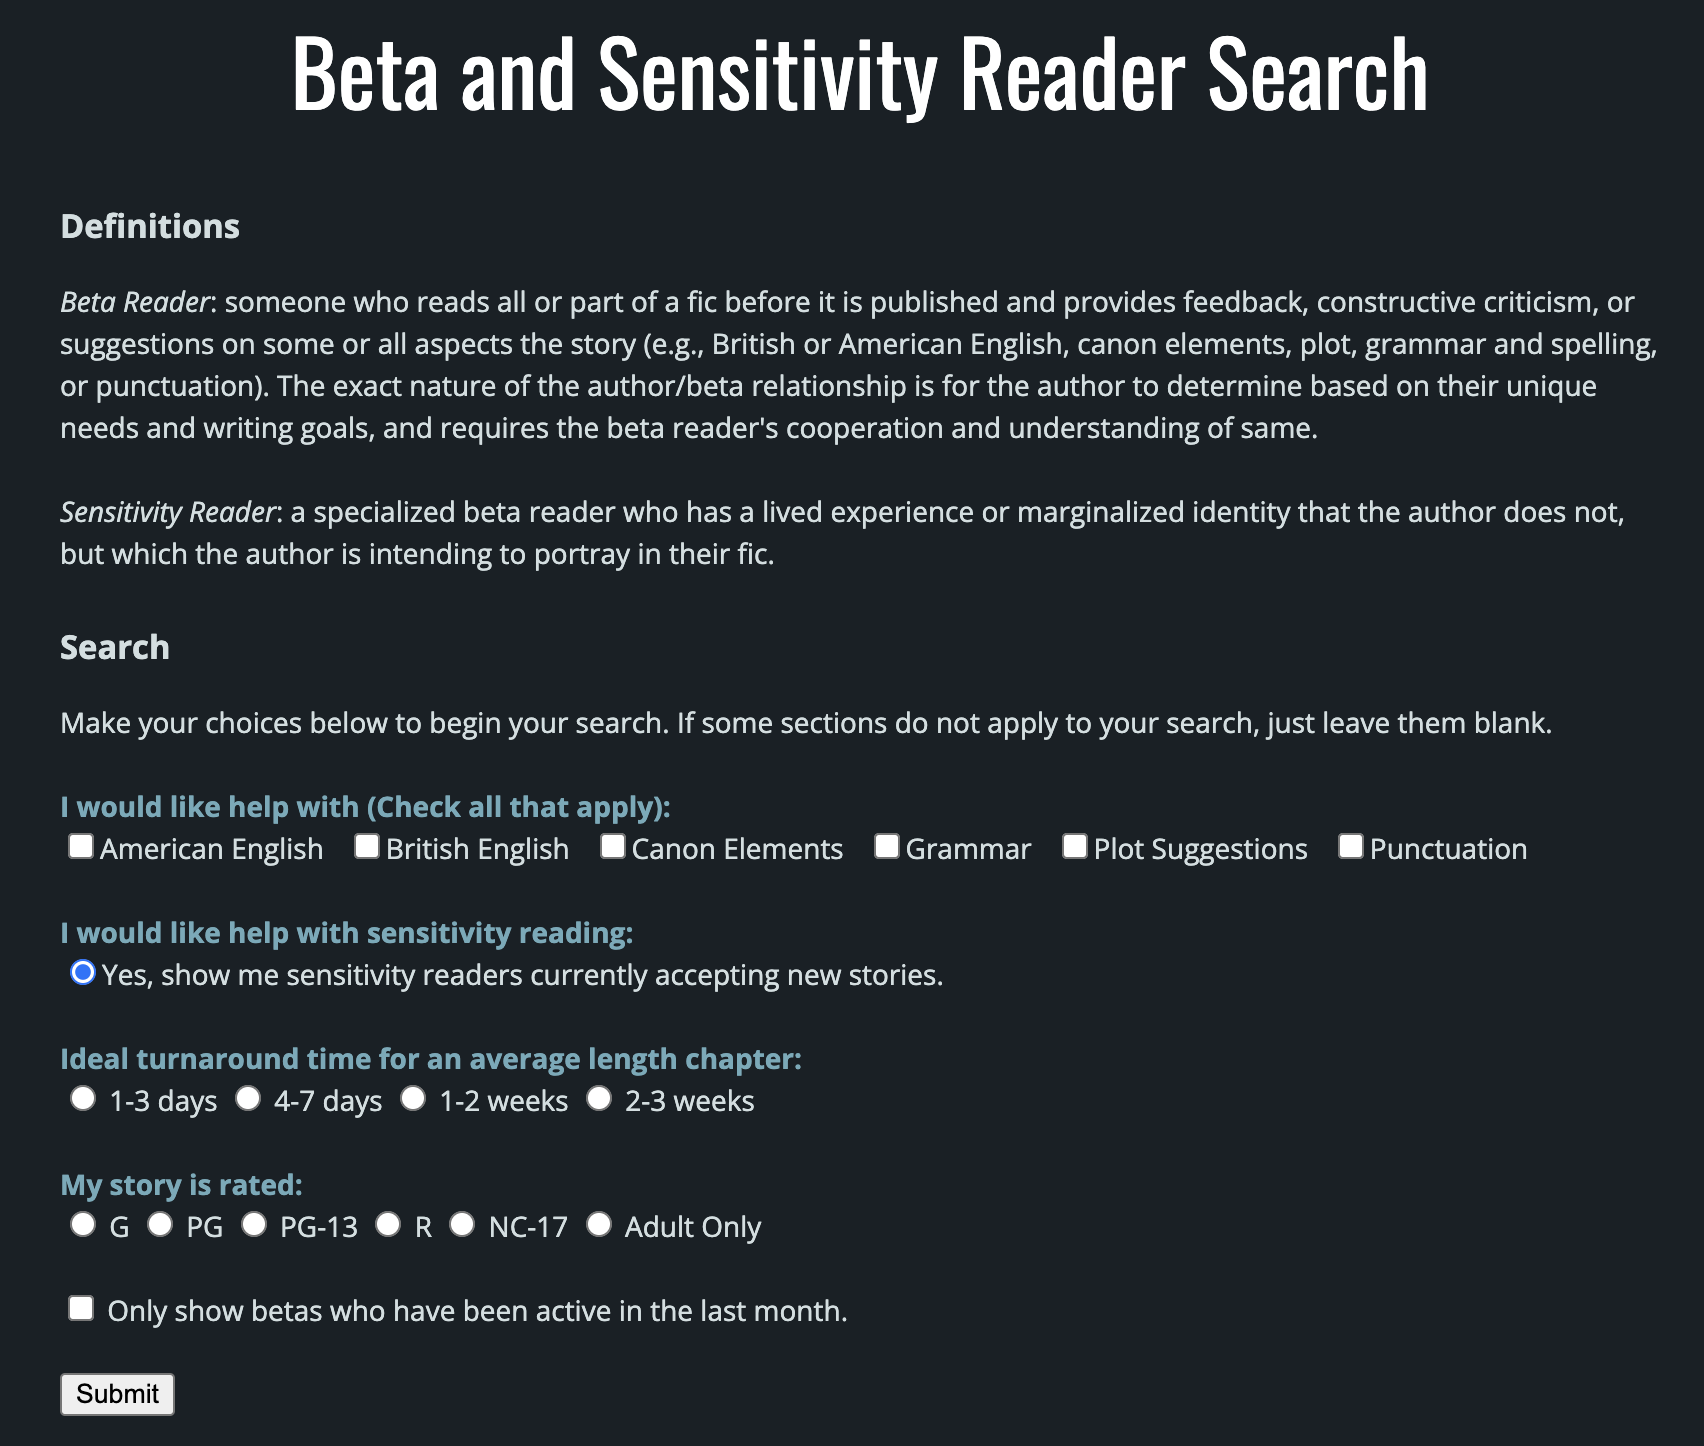 Beta and Sensitivity Search form